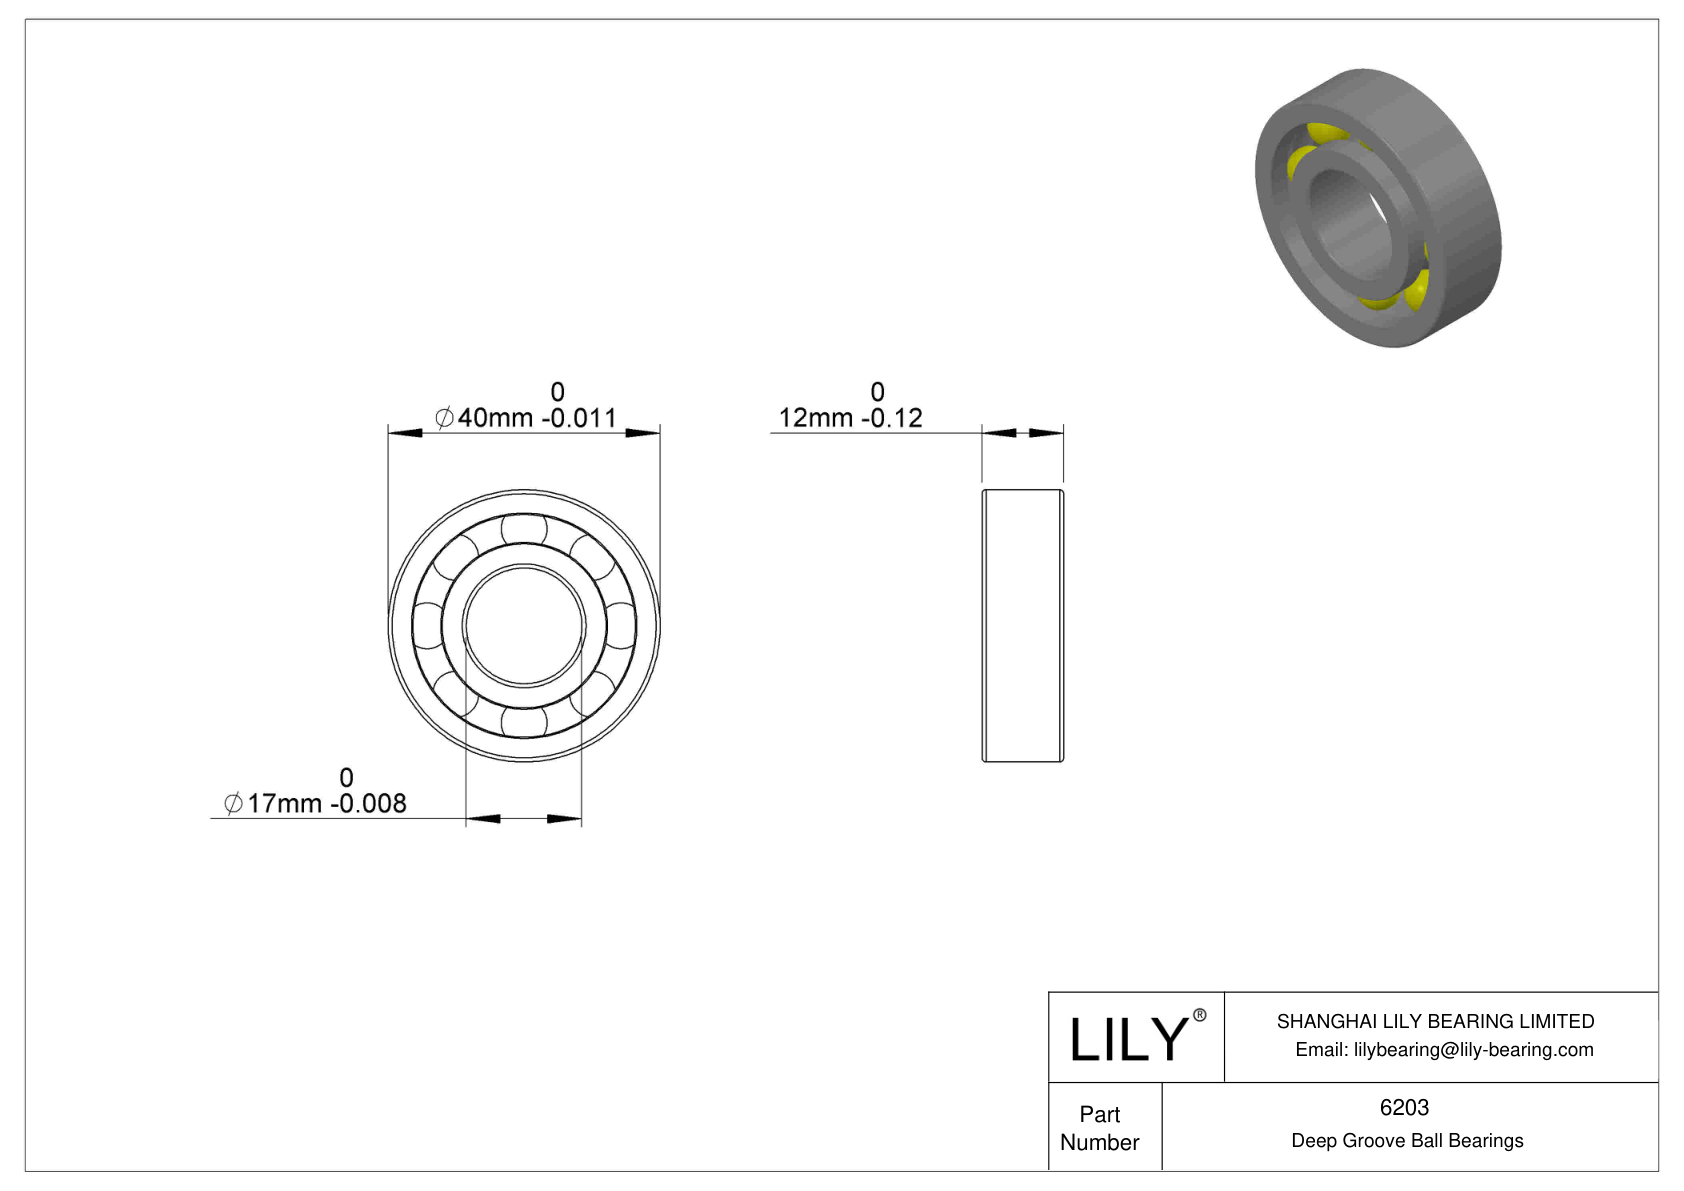 LILY-PU620360-18C2L12M10 Polyurethane Coated Bearing With Screw cad drawing